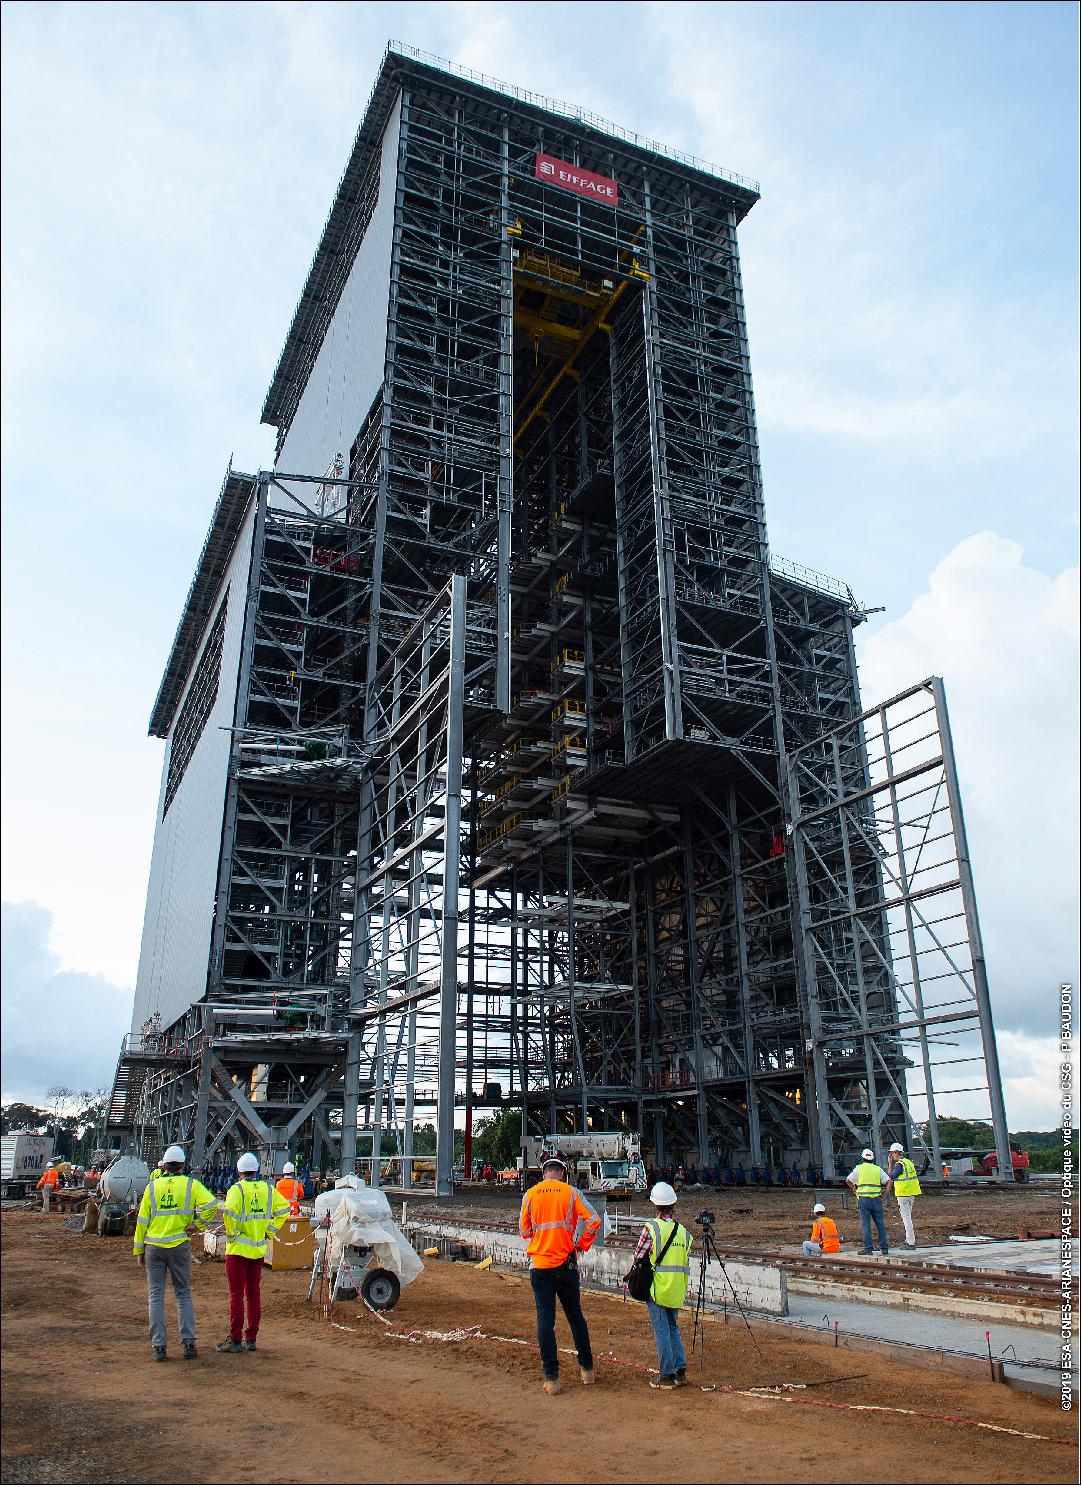 Figure 68: The mobile gantry, a 90 m high 8,200 ton metallic structure stands on 16 bogies that move this colossal structure. It houses Ariane 6 until it is retracted about five hours before launch (image credit: ESA)